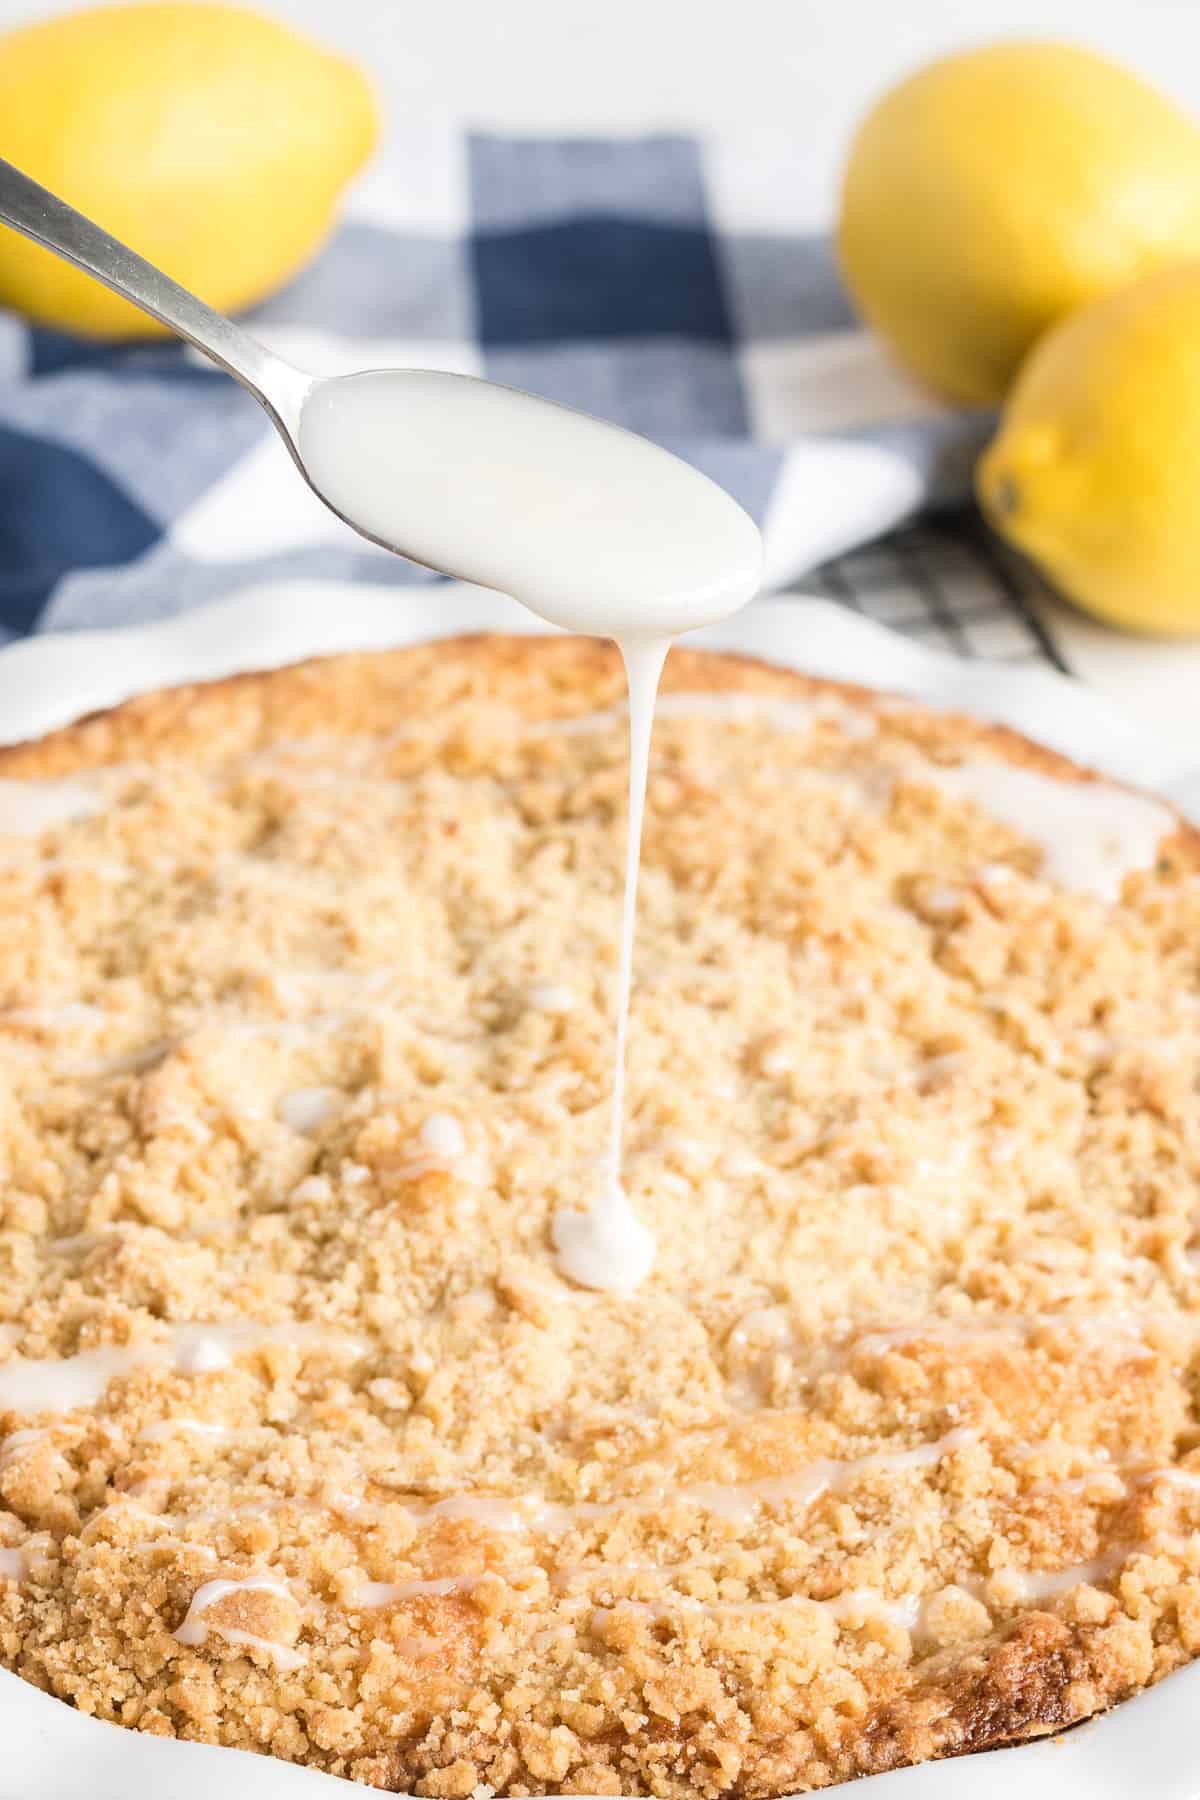 Lemon icing pours from a spoon on to the surface of the lemon zucchini cake.